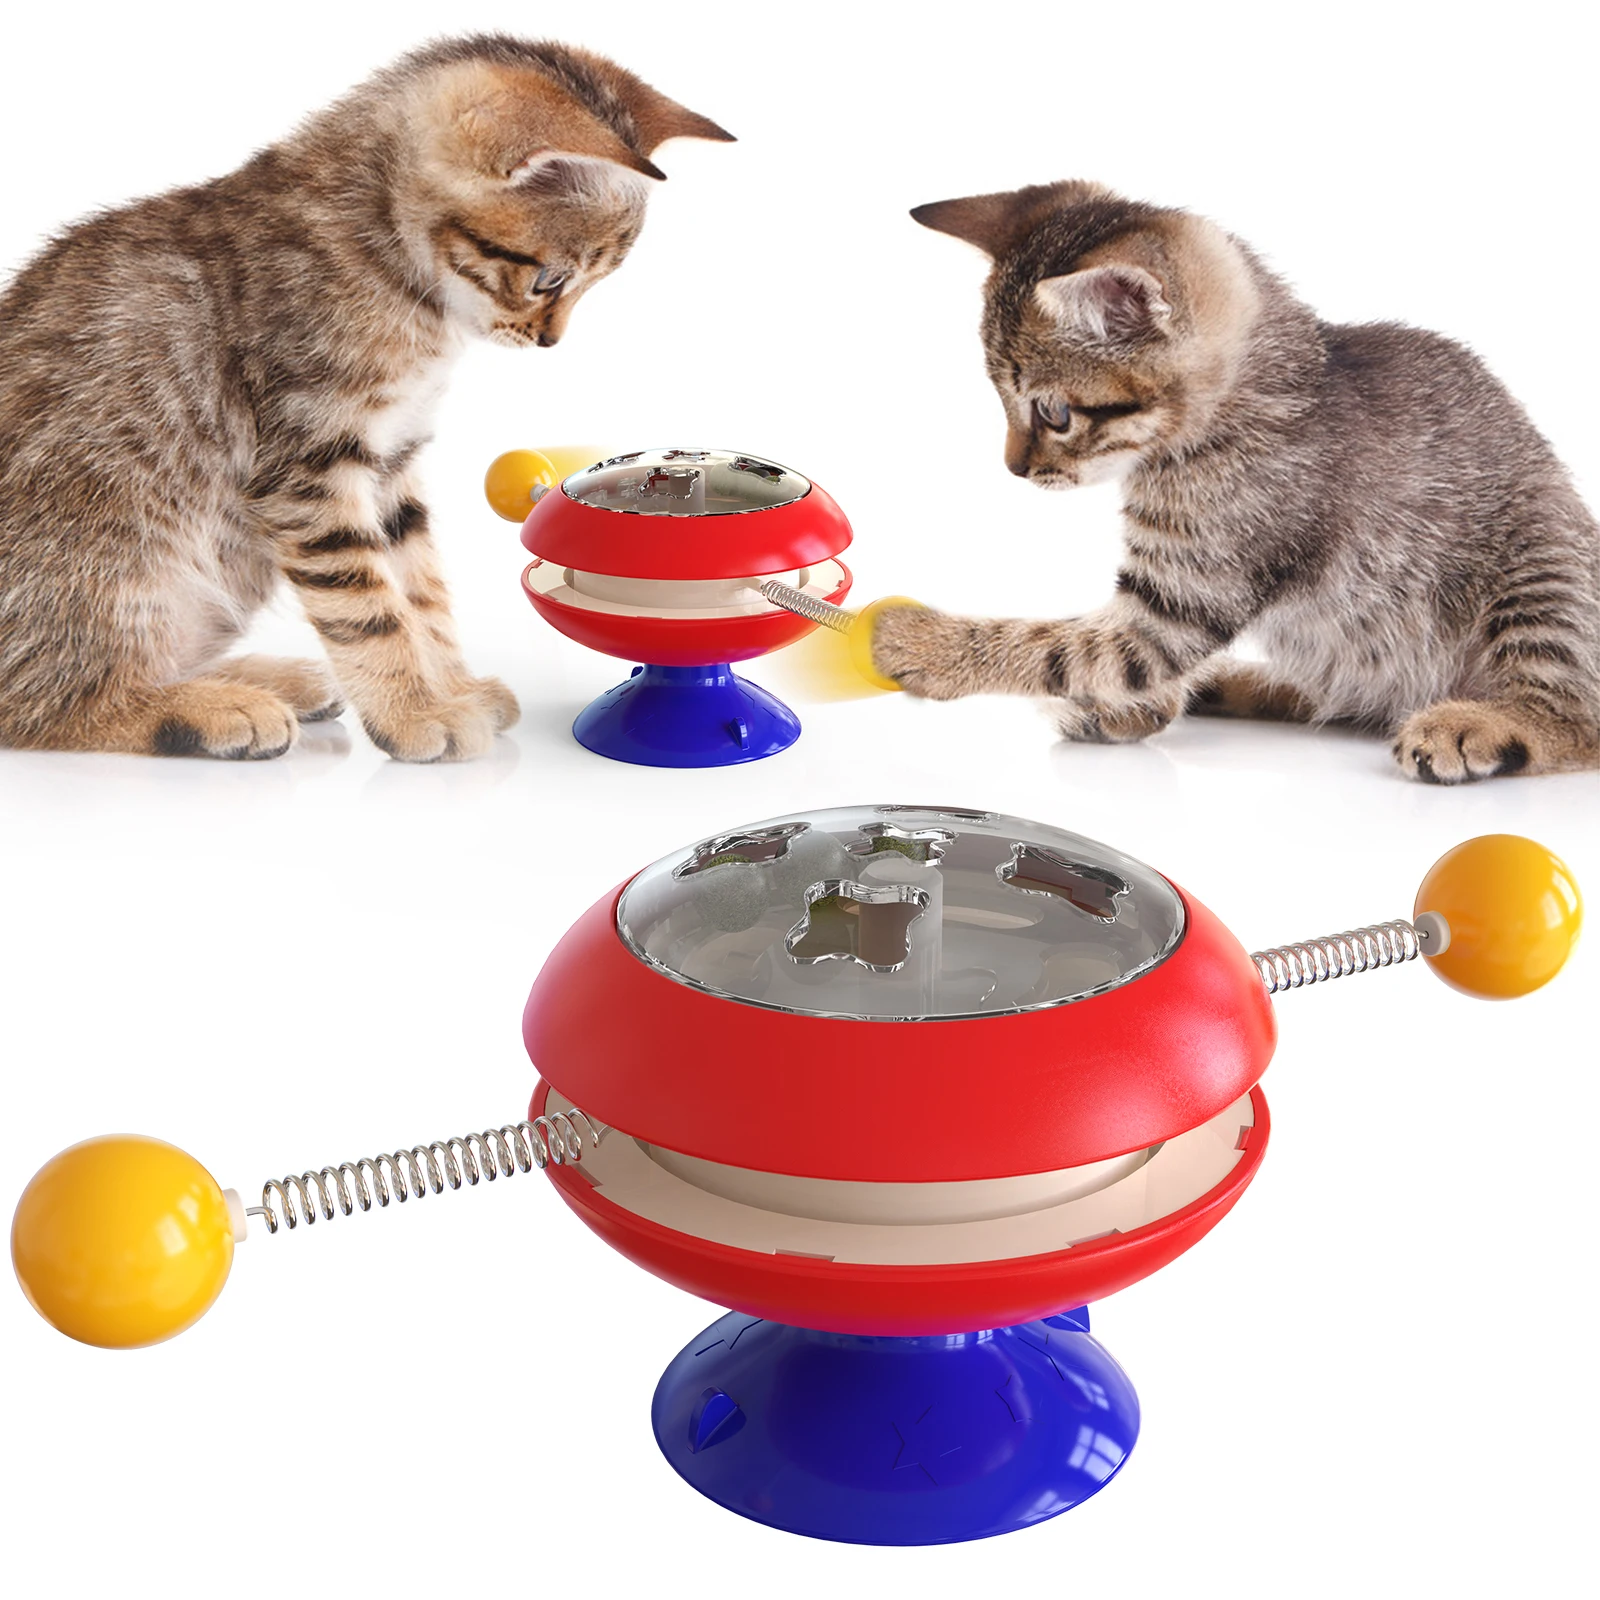 

Pet Gyro Ball Cat Toys For Indoor Cat Toys With Catnip Turntable Funny Interactive Automatic Cat Ball Toy, American blue, lake blue, green, yellow, pink